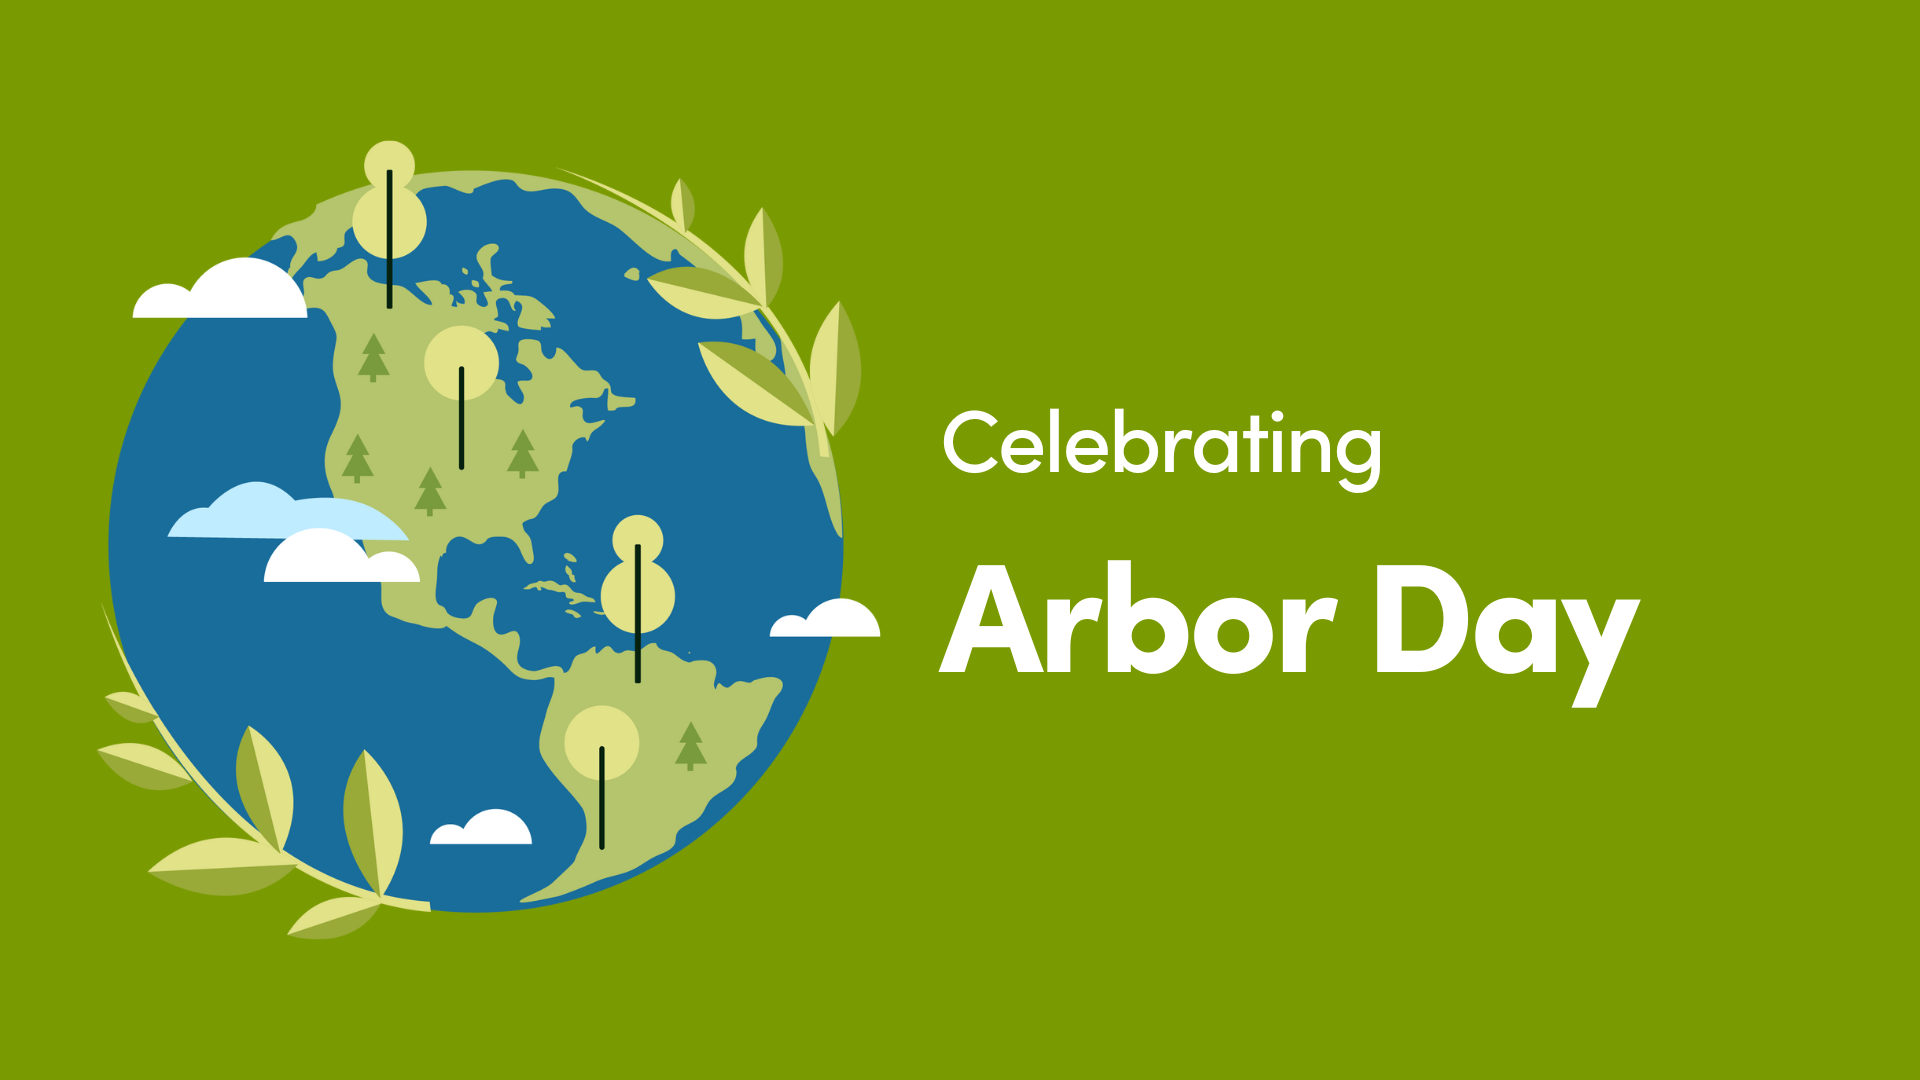 An illustration of the Earth encircled by leaves and populated by trees, with the words "Celebrating Arbor Day"